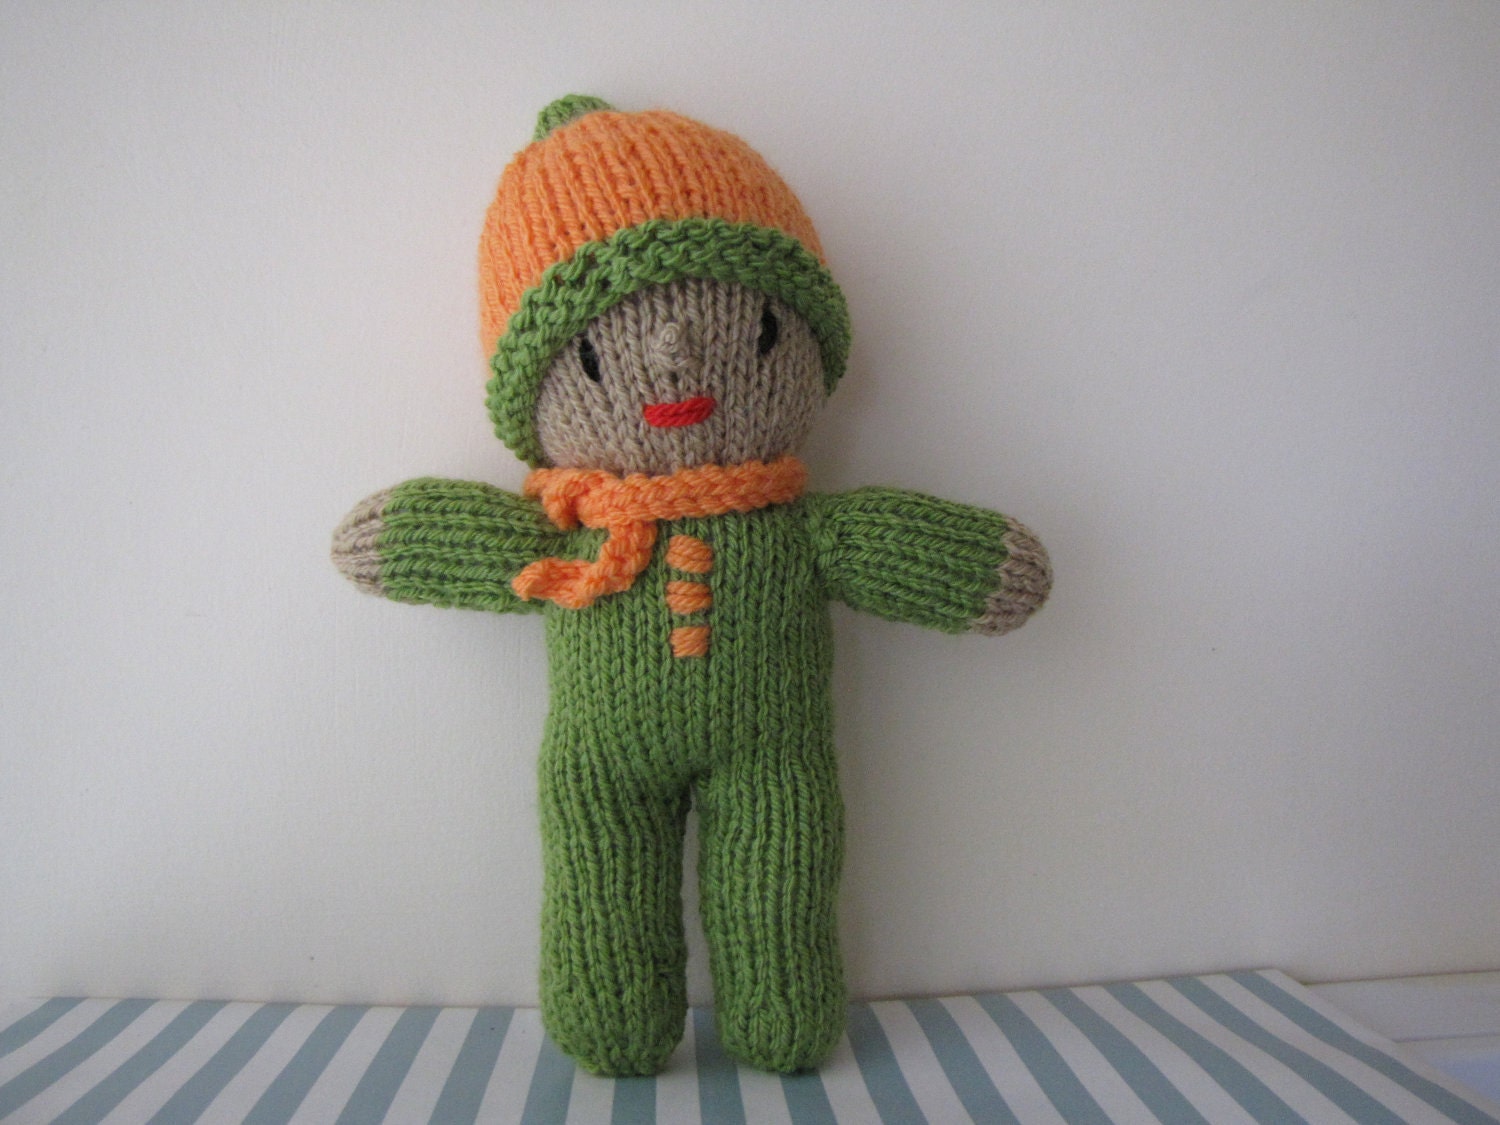 Green and orange knitted doll